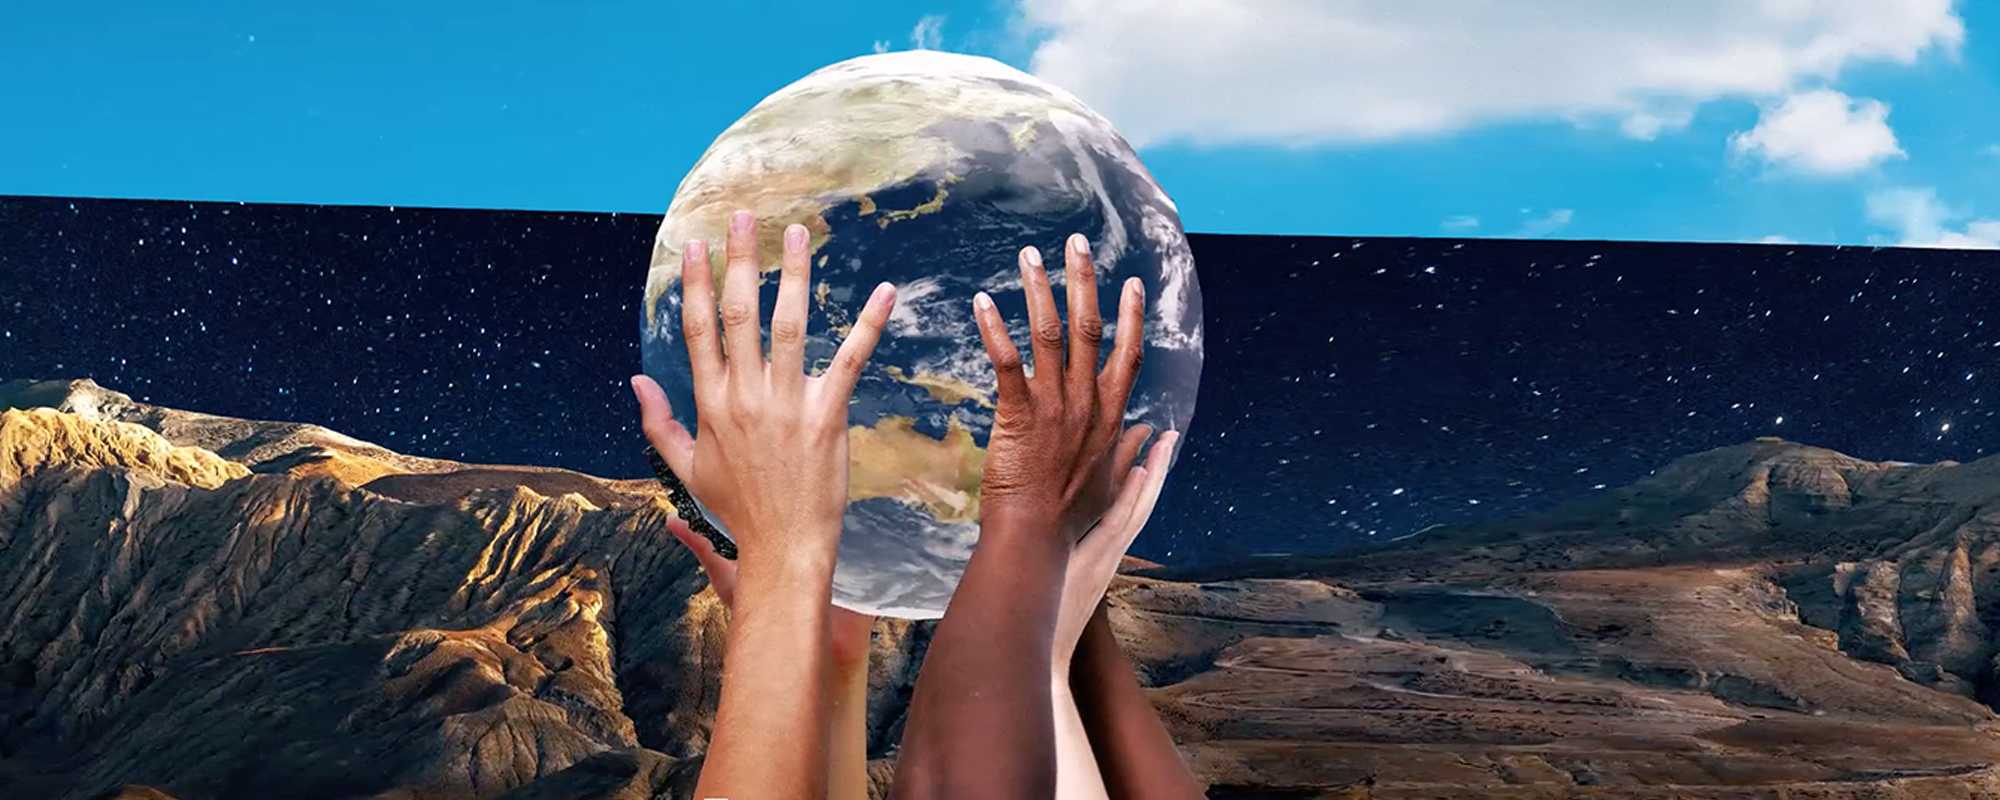 Image shows four human hands, all with different skin colours,  supporting a beach ball-sized globe. This is overlaid onto a composite background of blue sky, starry night sky, and dramatic mountains.